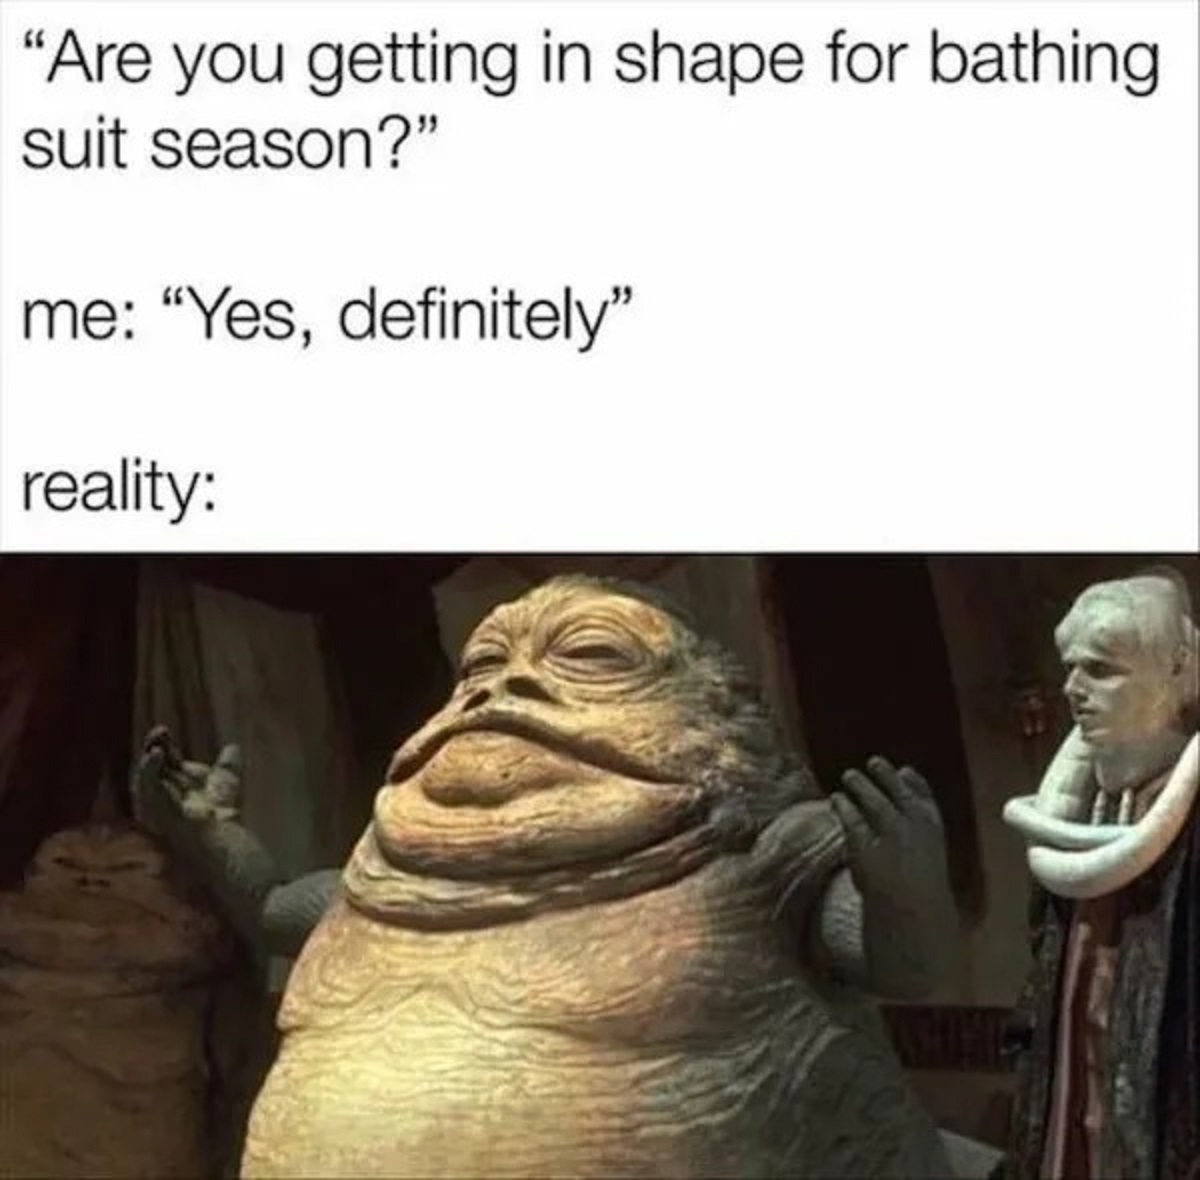 jabba the hutt - "Are you getting in shape for bathing suit season?" me "Yes, definitely" reality Whing